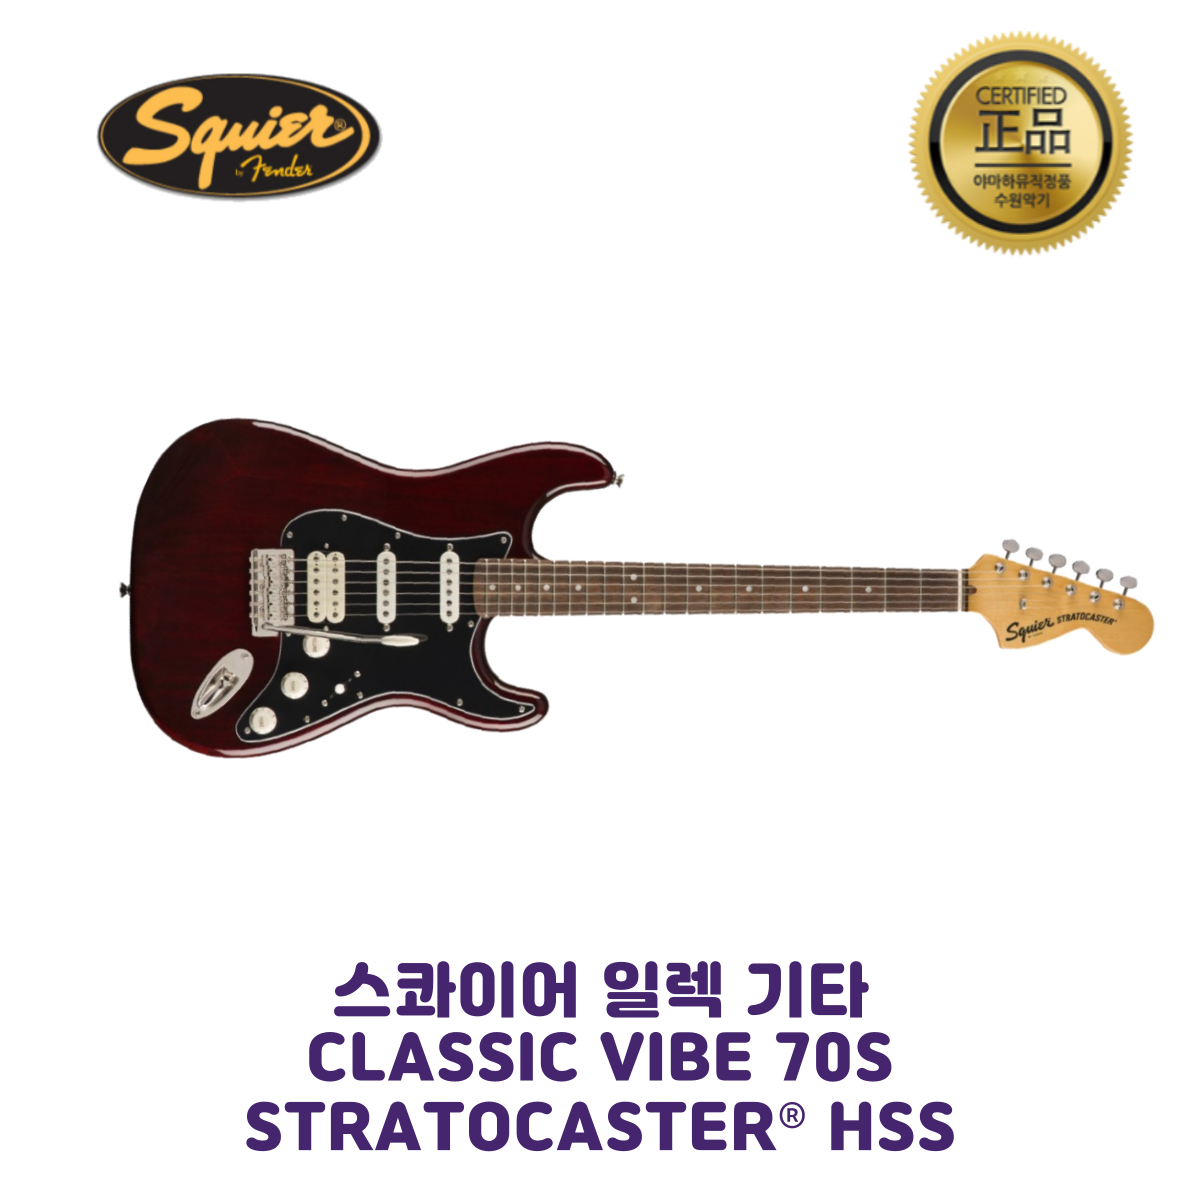 Classic Vibe 70s Stratocaster® HSS